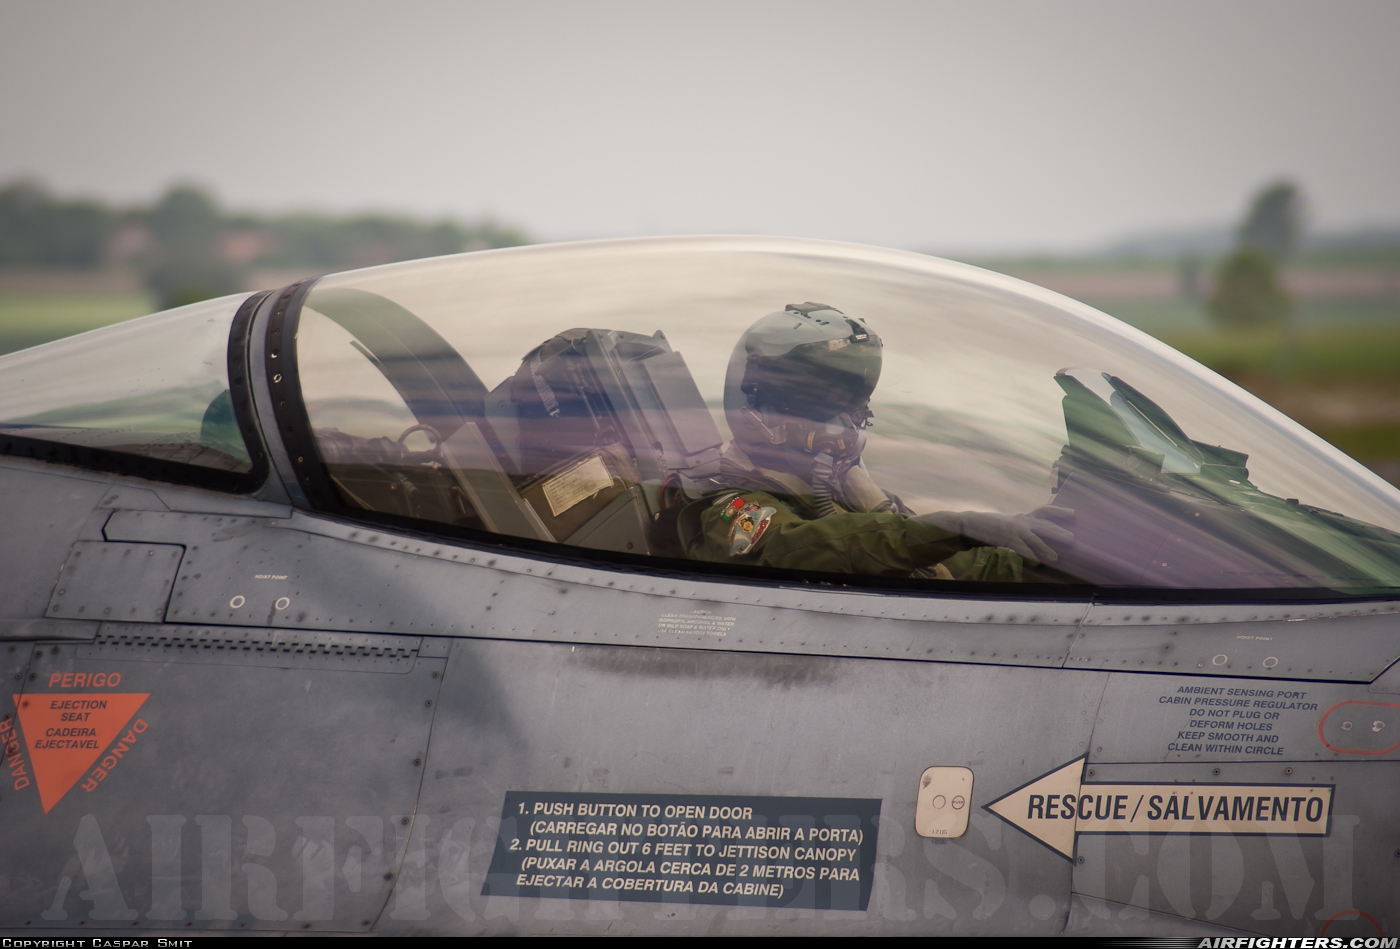 Portugal - Air Force General Dynamics F-16AM Fighting Falcon 15123 at Cambrai - Epinoy (LFQI), France